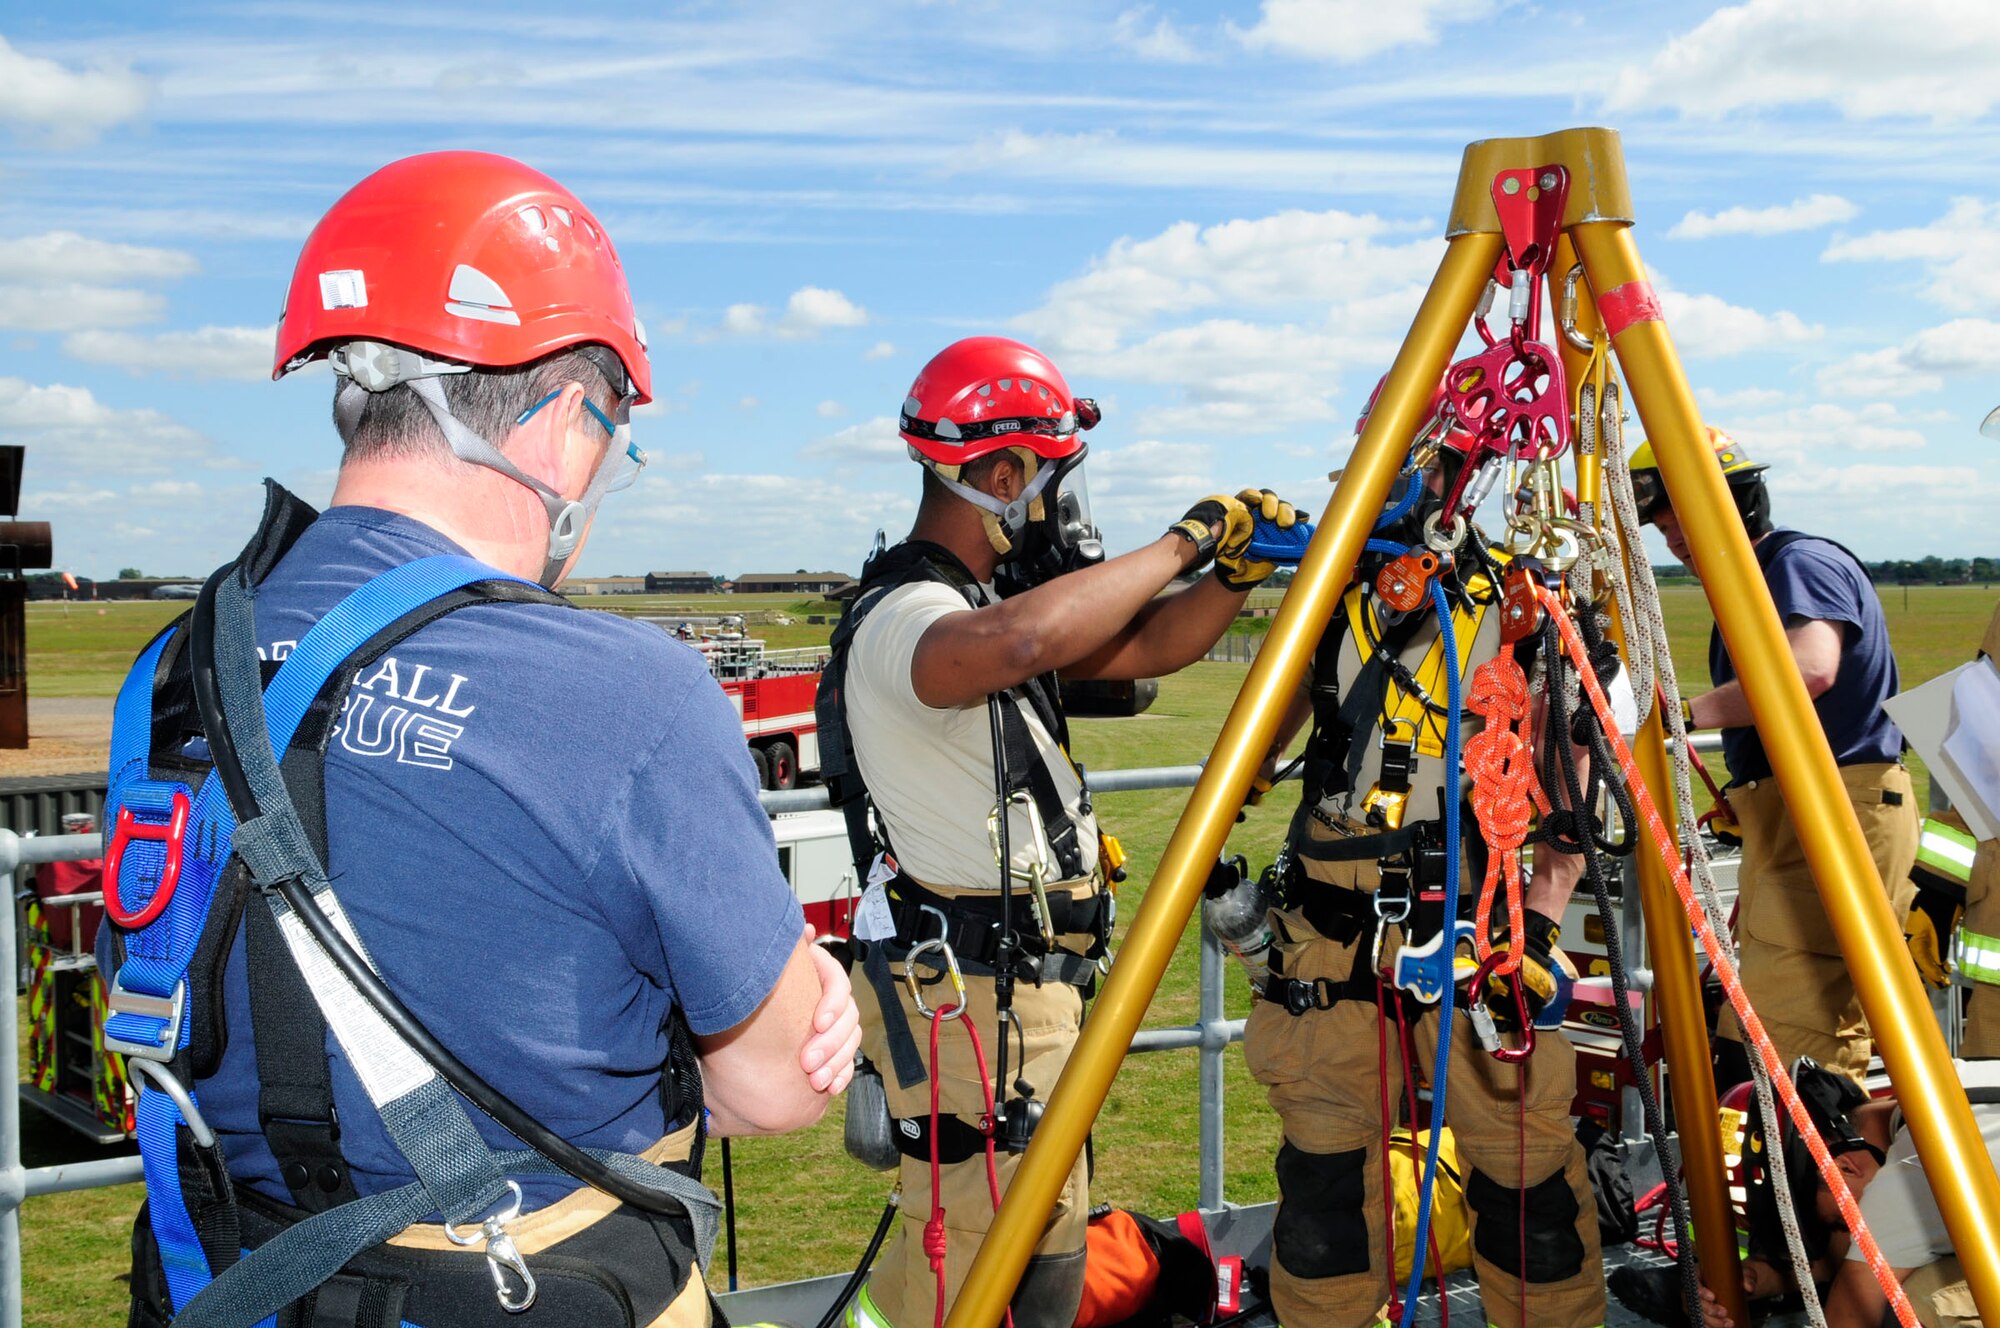 Paul Cusden, left, 100th Civil Engineer Squadron Fire Department firefighter from Ramsgate, Kent, England, and U.S. Air Force Senior Airman Theodore Willis, 100th CES Fire Department firefighter and driver/operator from Stockton, Calif., attach rescue rope lines to a tripod during confined-space training June 26, 2014, at the fire training area on RAF Mildenhall, England. The lines are used for raising and lowering responders and victims. A safety line is also attached to prevent freefall in case of rope system failure. (U.S. Air Force photo/Karen Abeyasekere/Released)